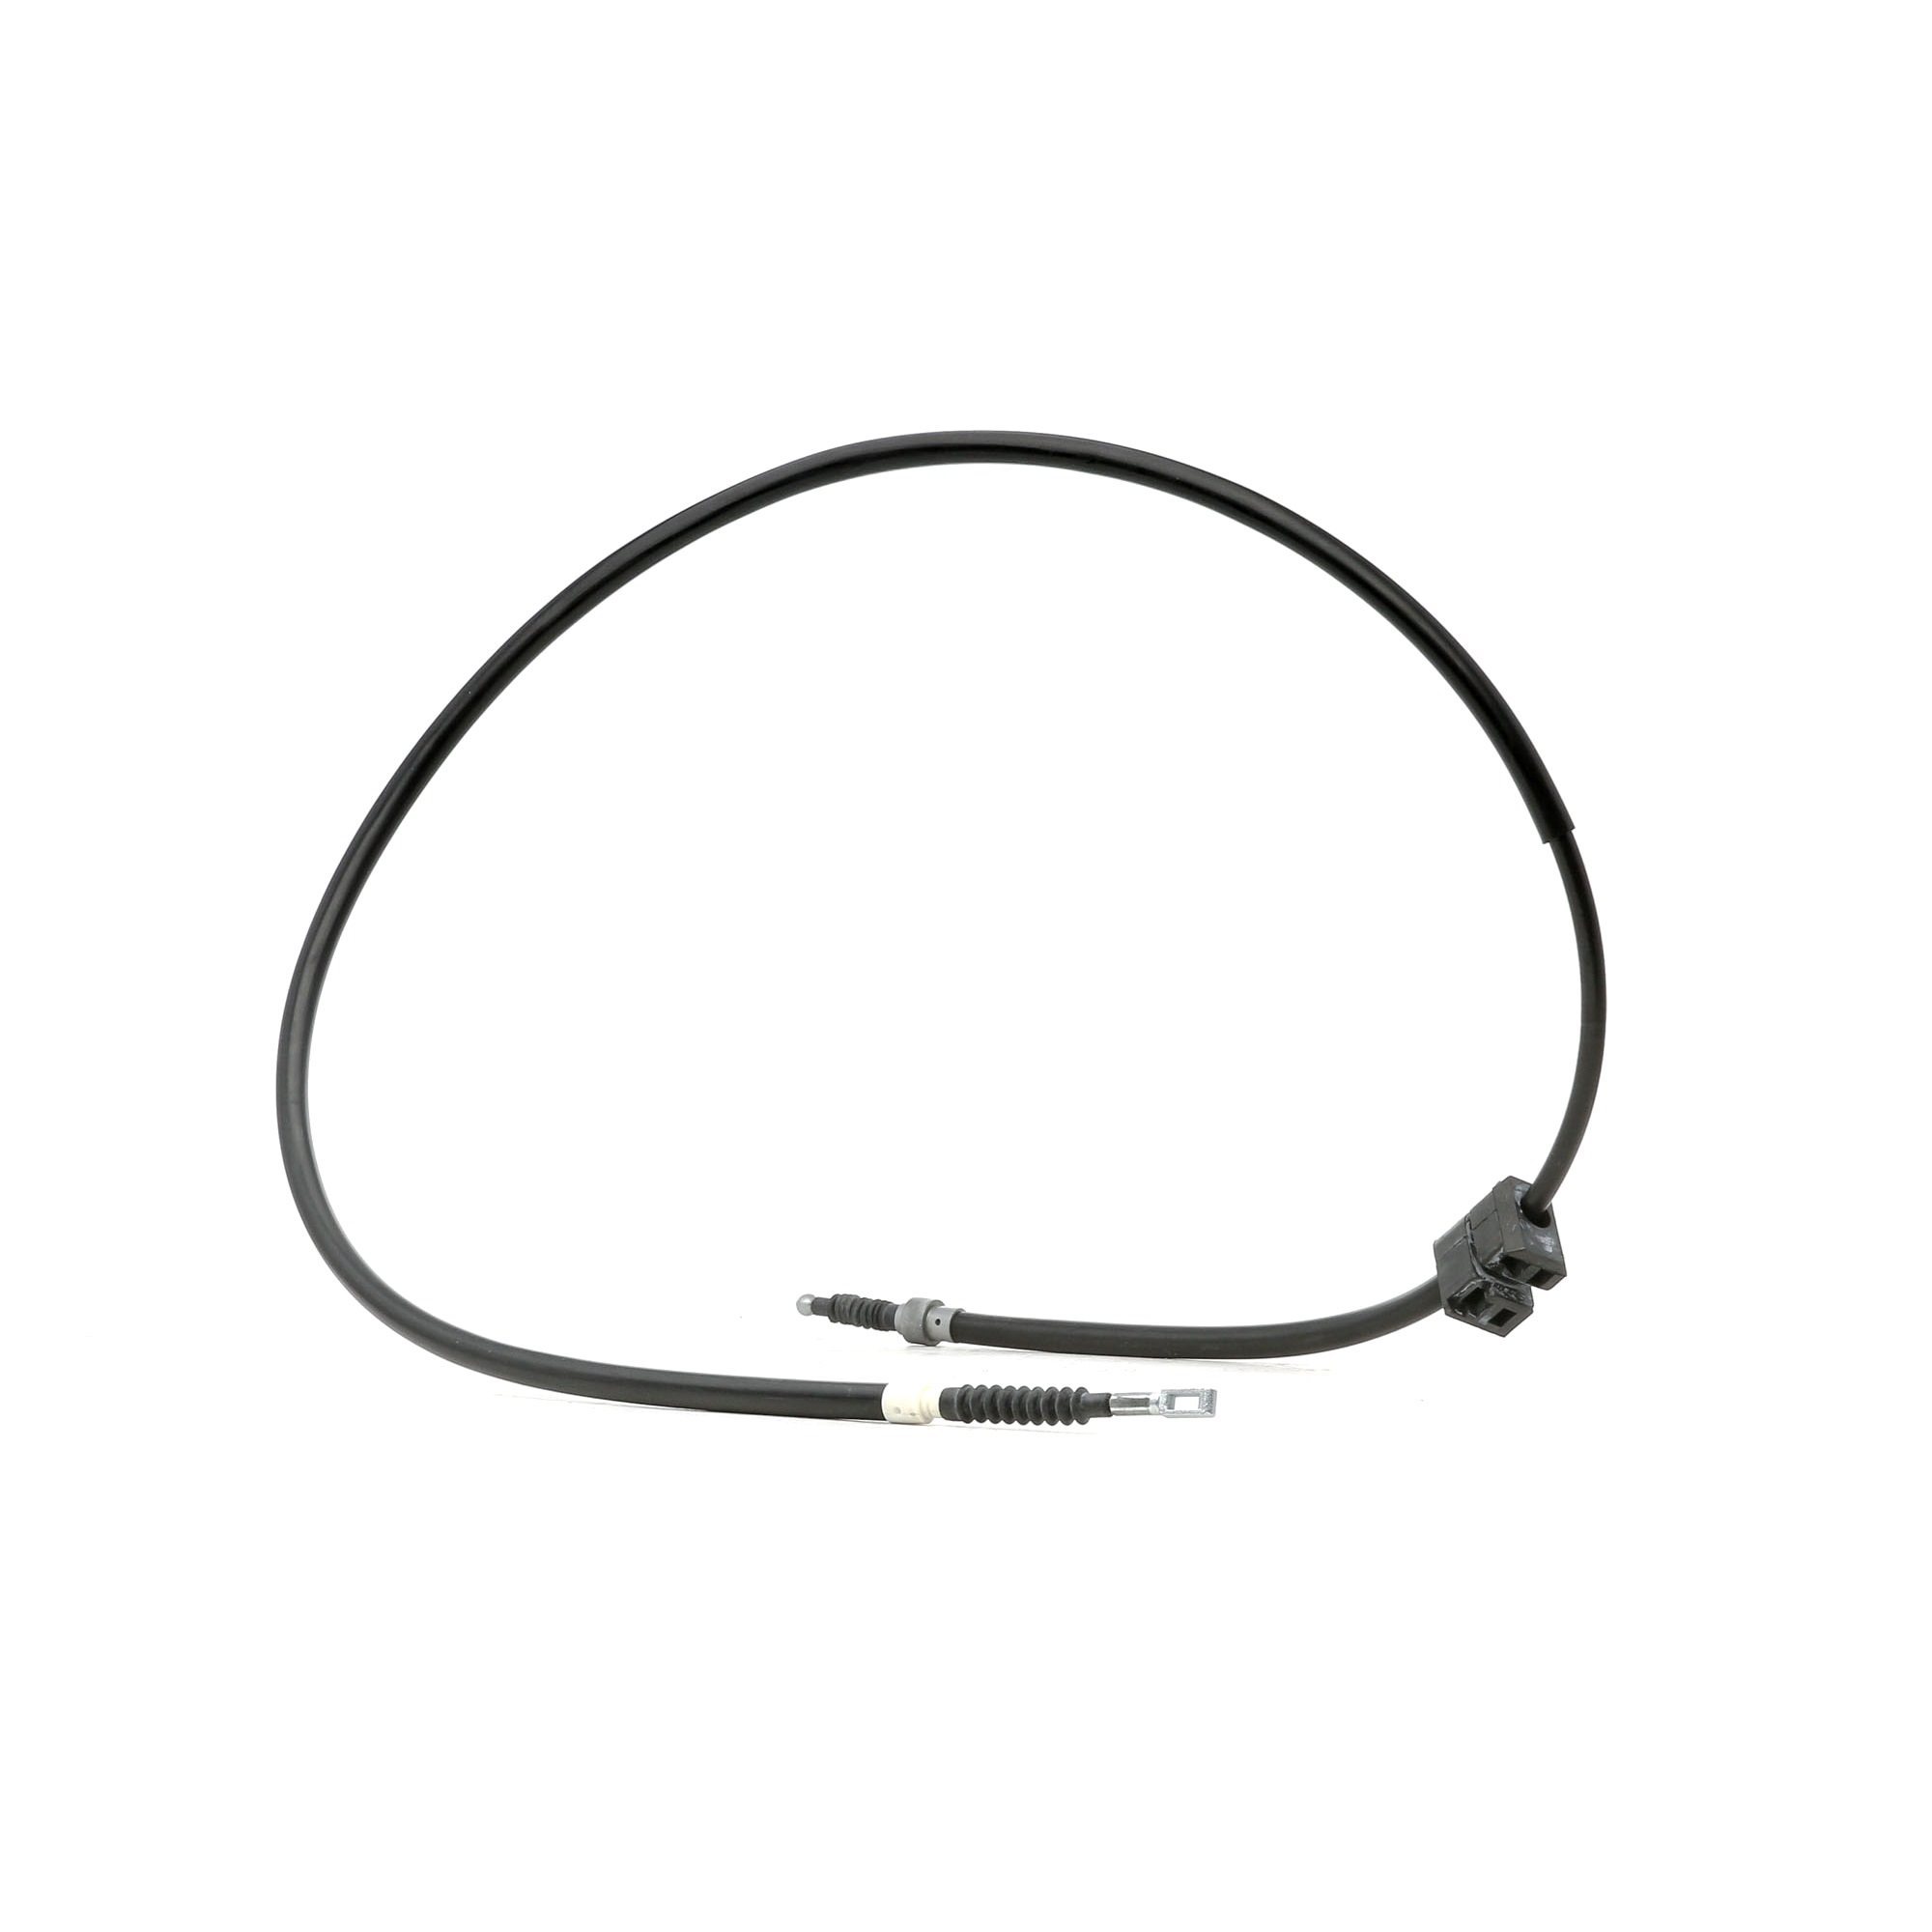 Original BOSCH BC663 Parking brake cable 1 987 477 815 for AUDI A6